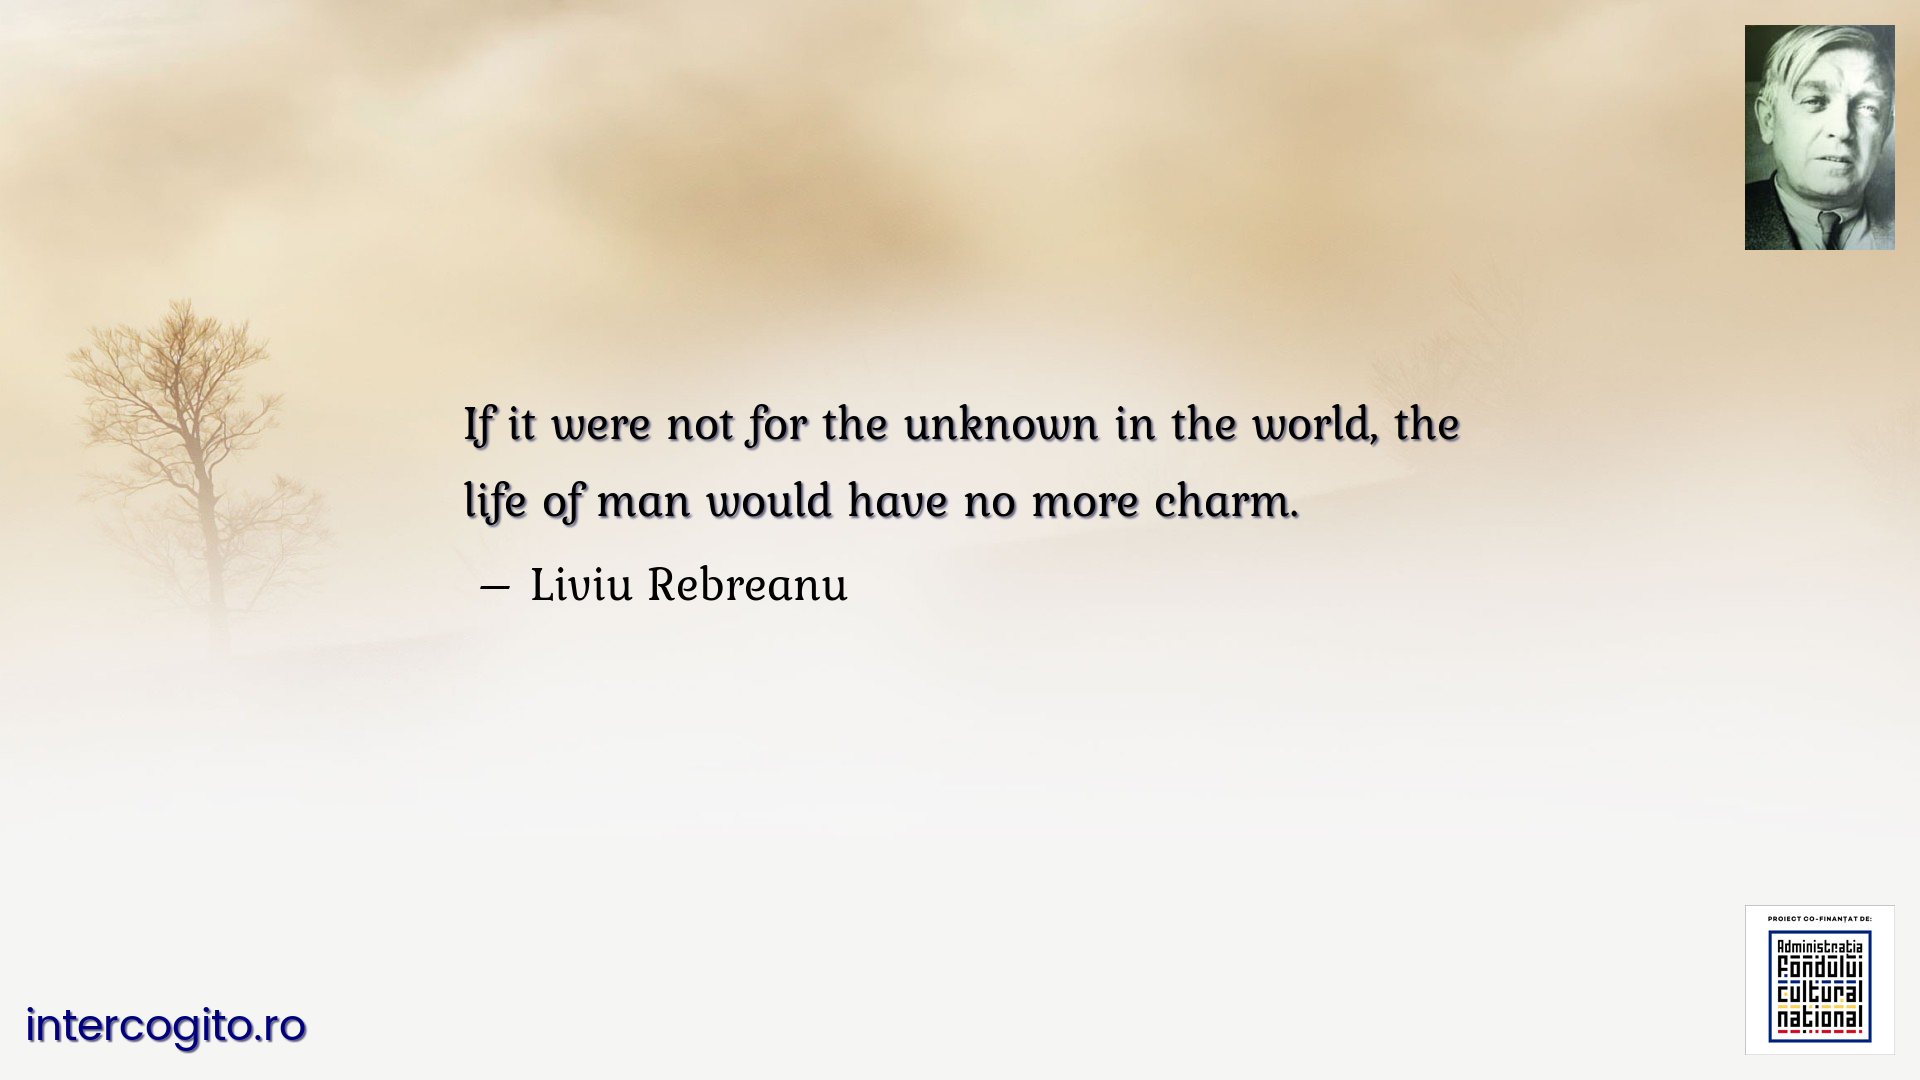 If it were not for the unknown in the world, the life of man would have no more charm.